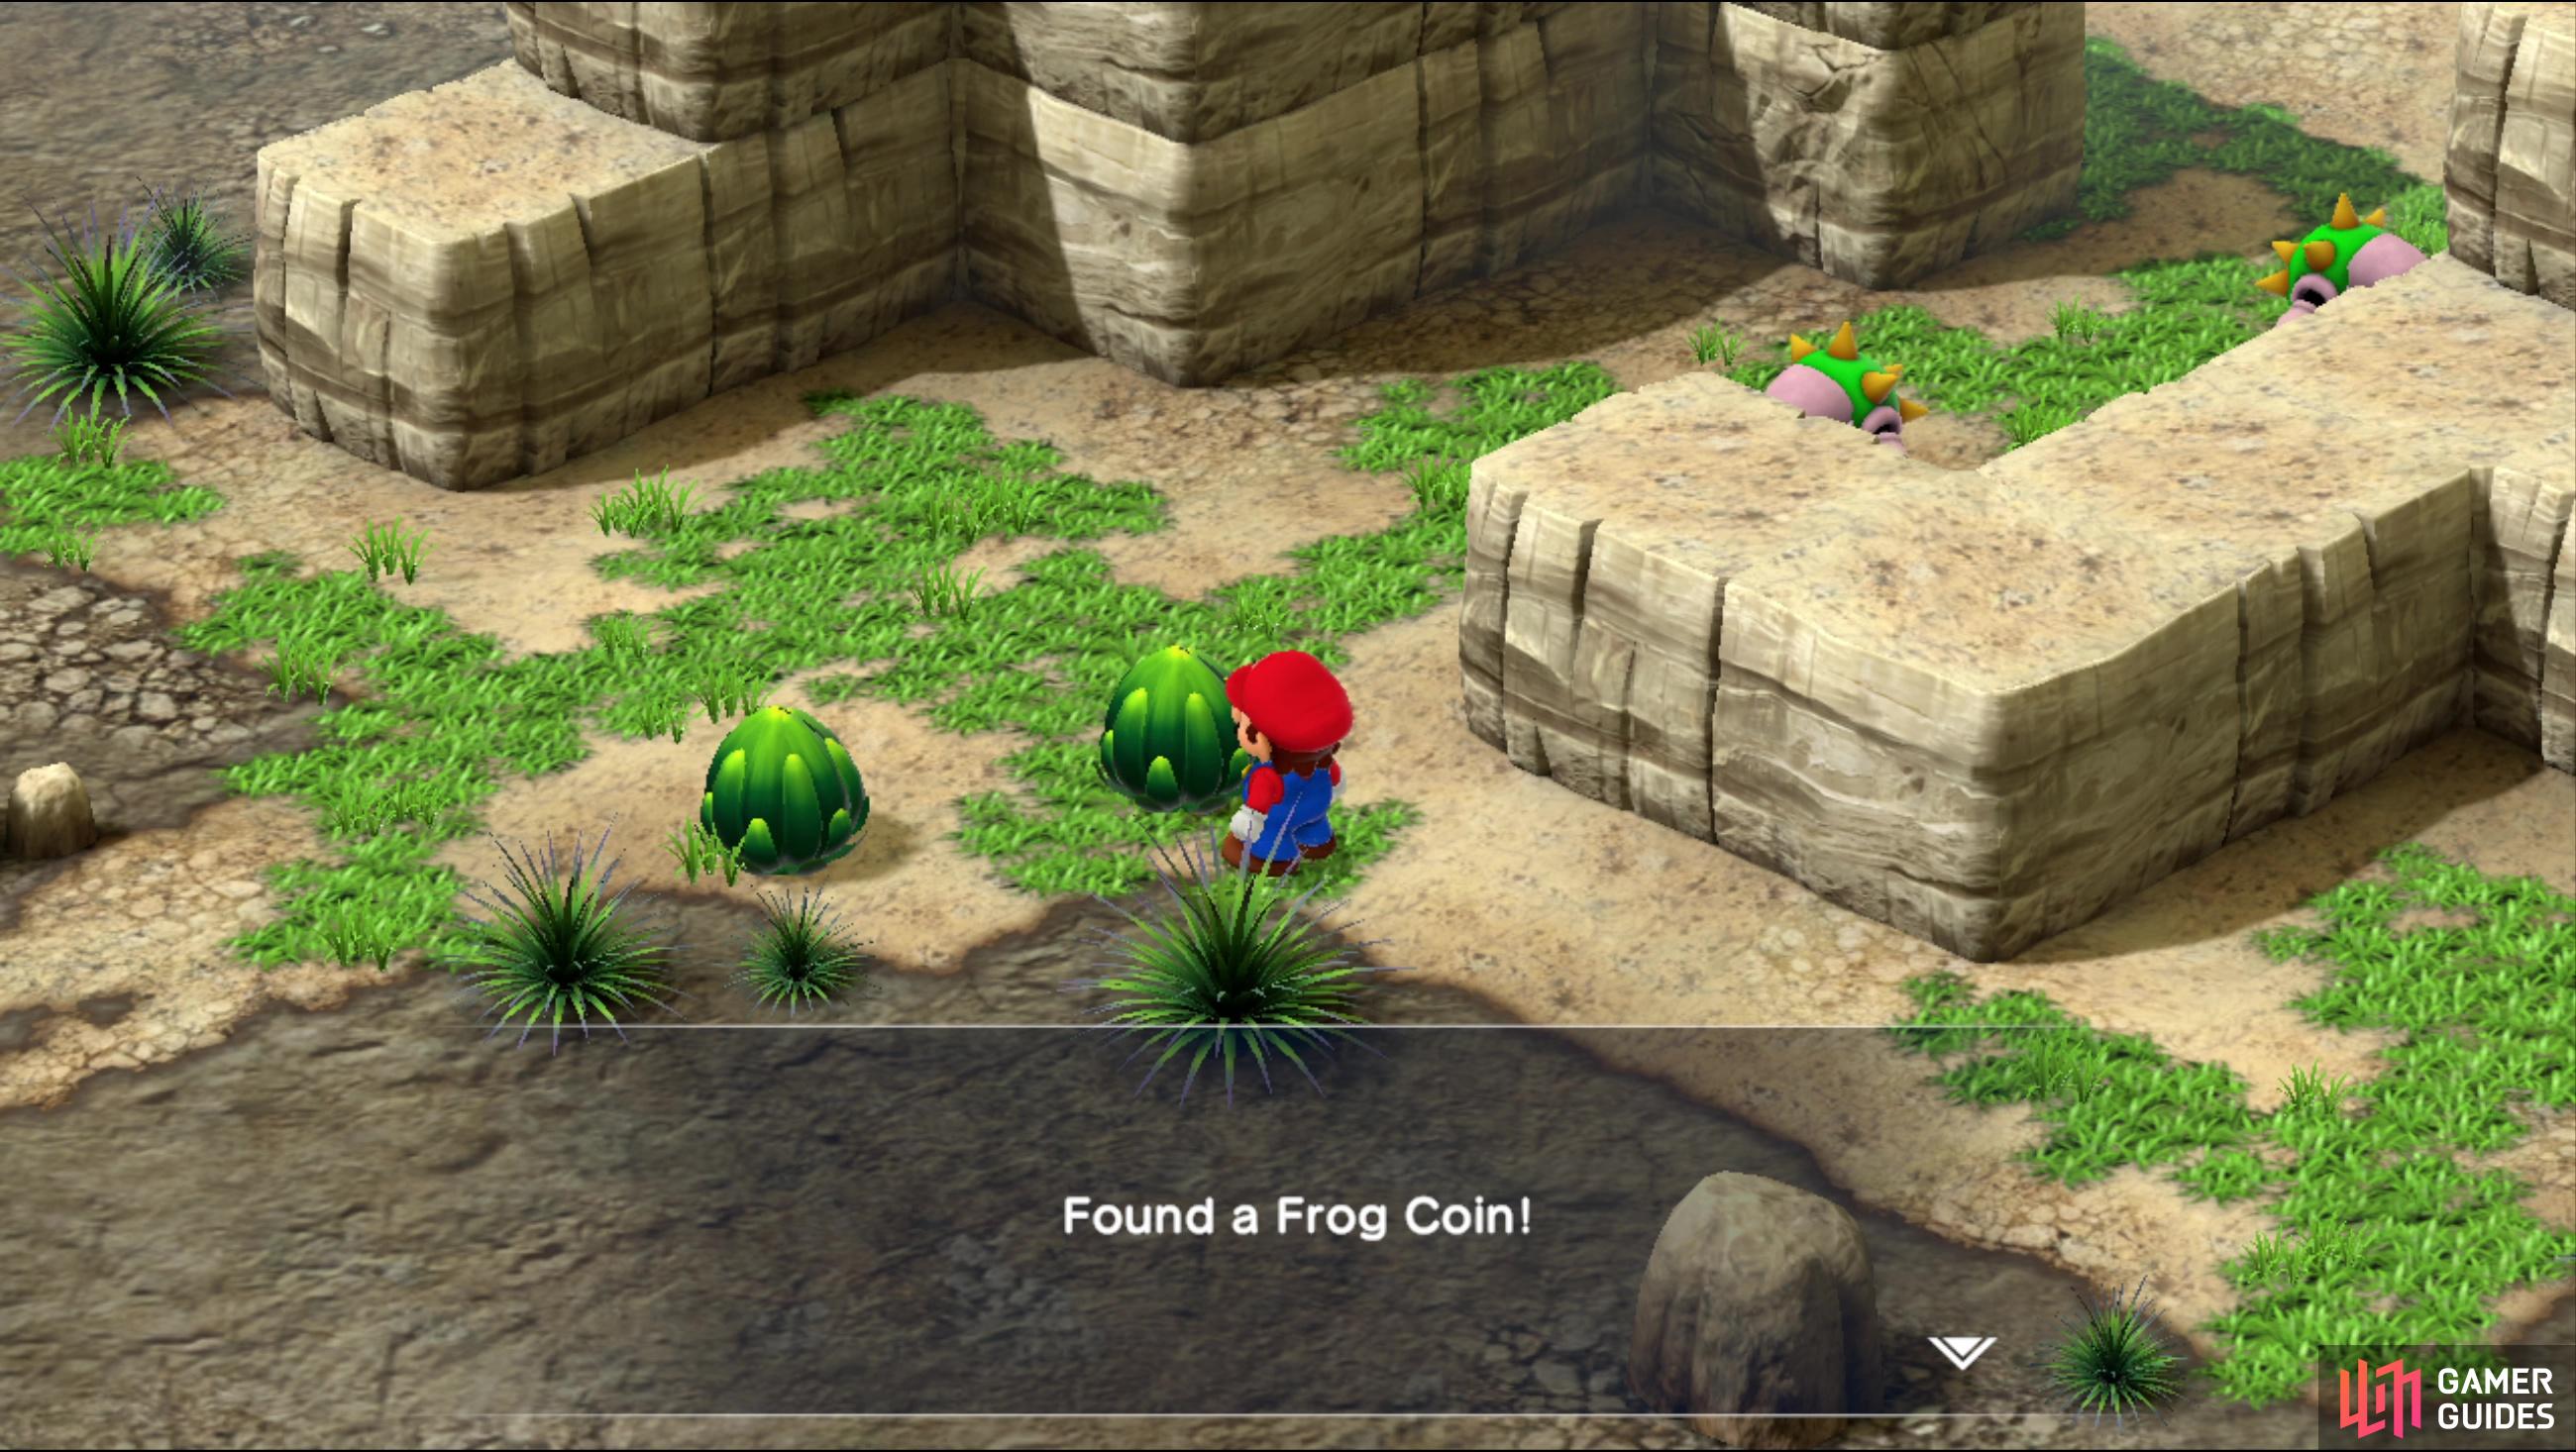 Search a plant to find a Frog Coin,